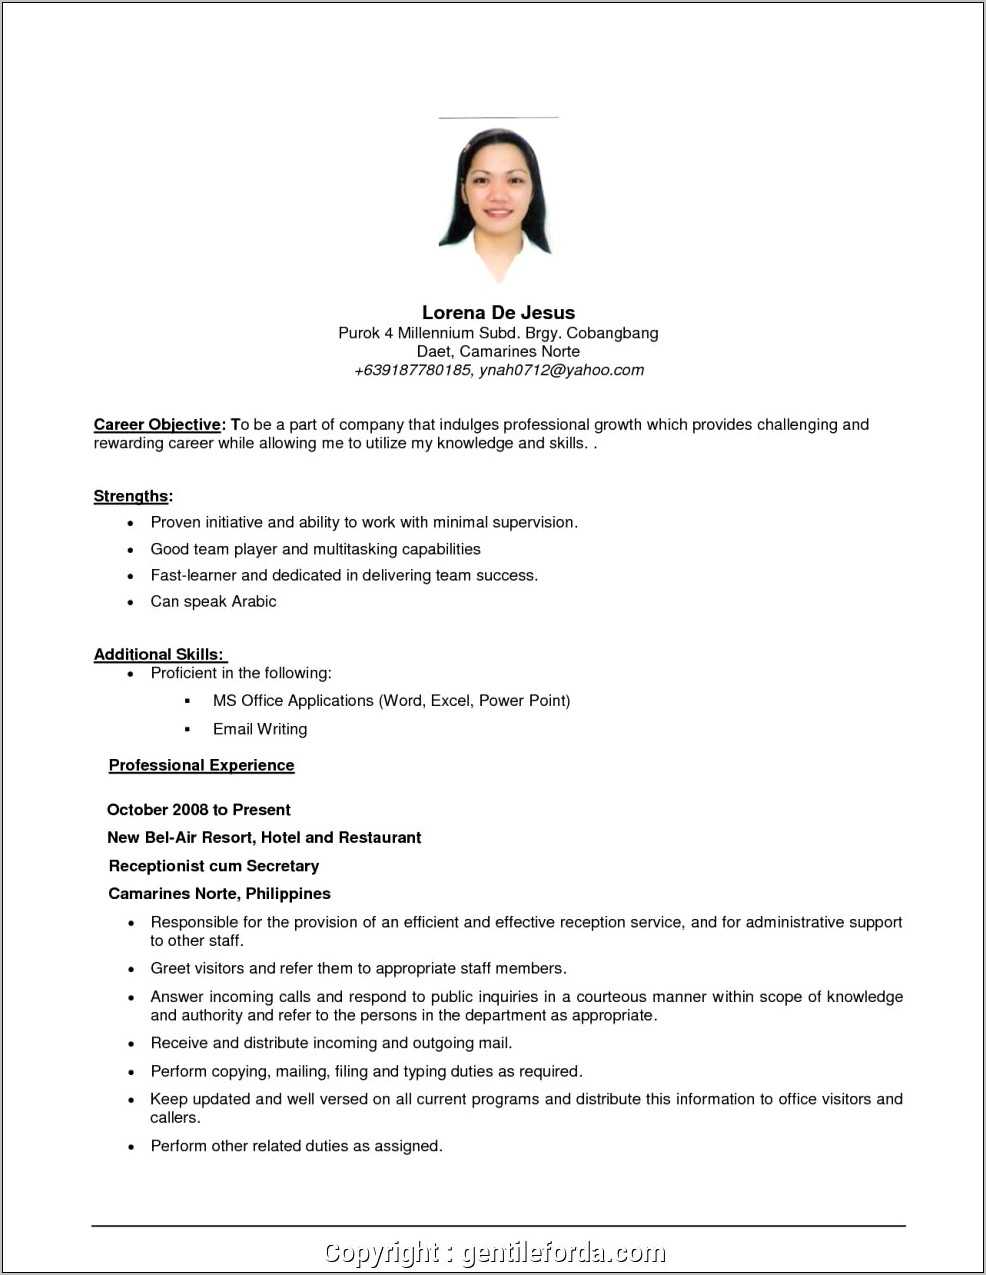 Resume Objective Examples For Any Position Resume Example Gallery